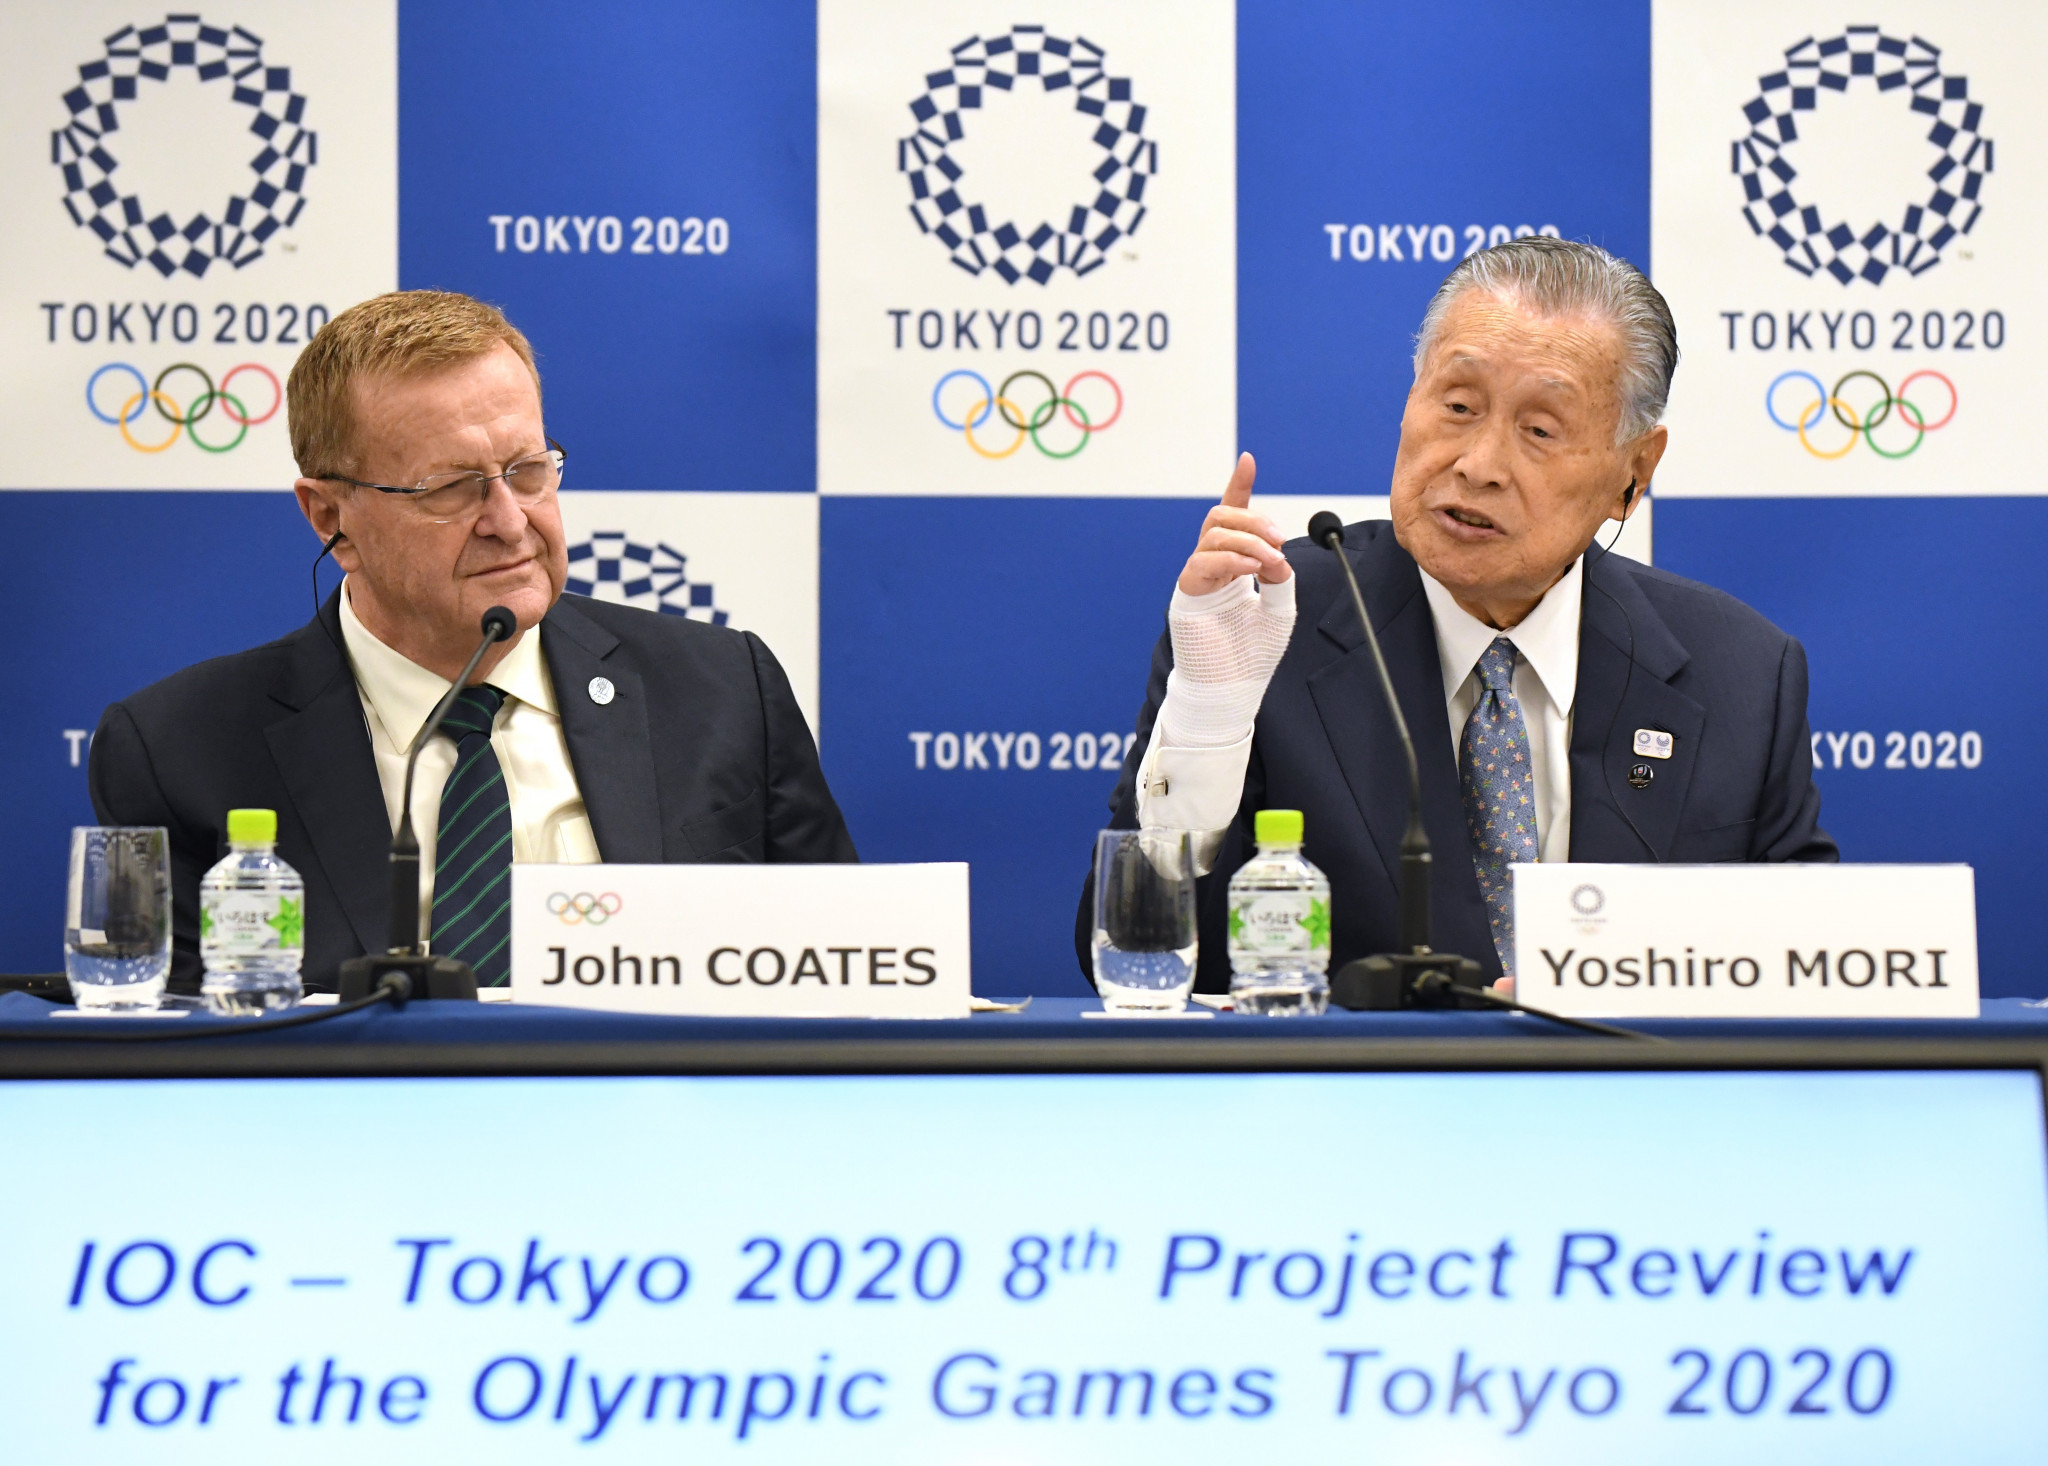 Tokyo 2020 ticket prices are set to be on the agenda when the IOC Coordination Commission visit next week ©Getty Images 